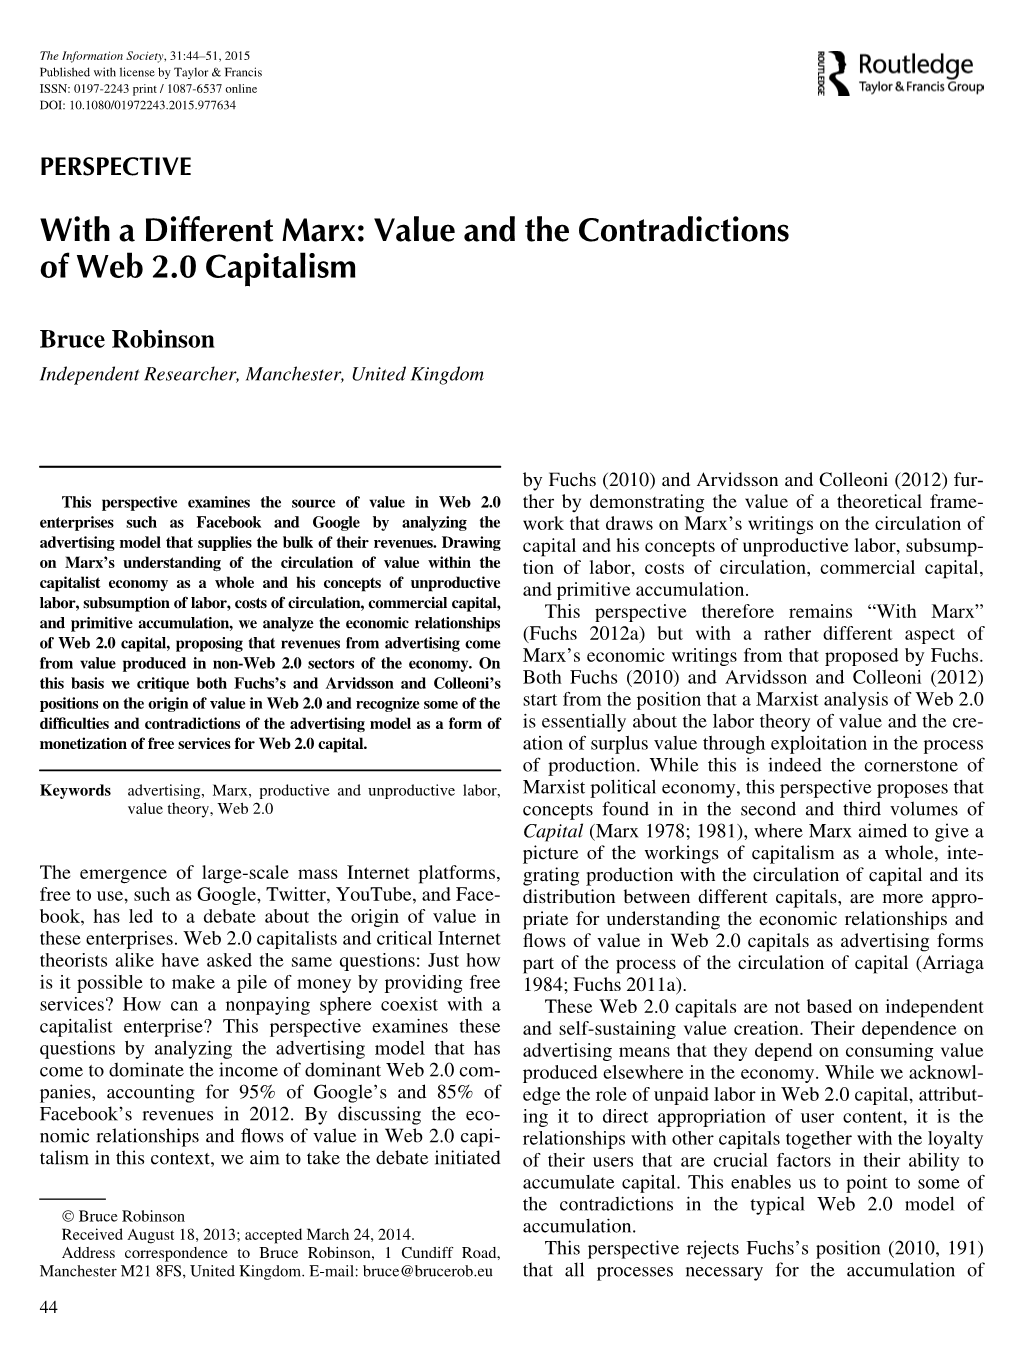 With a Different Marx: Value and the Contradictions of Web 2.0 Capitalism